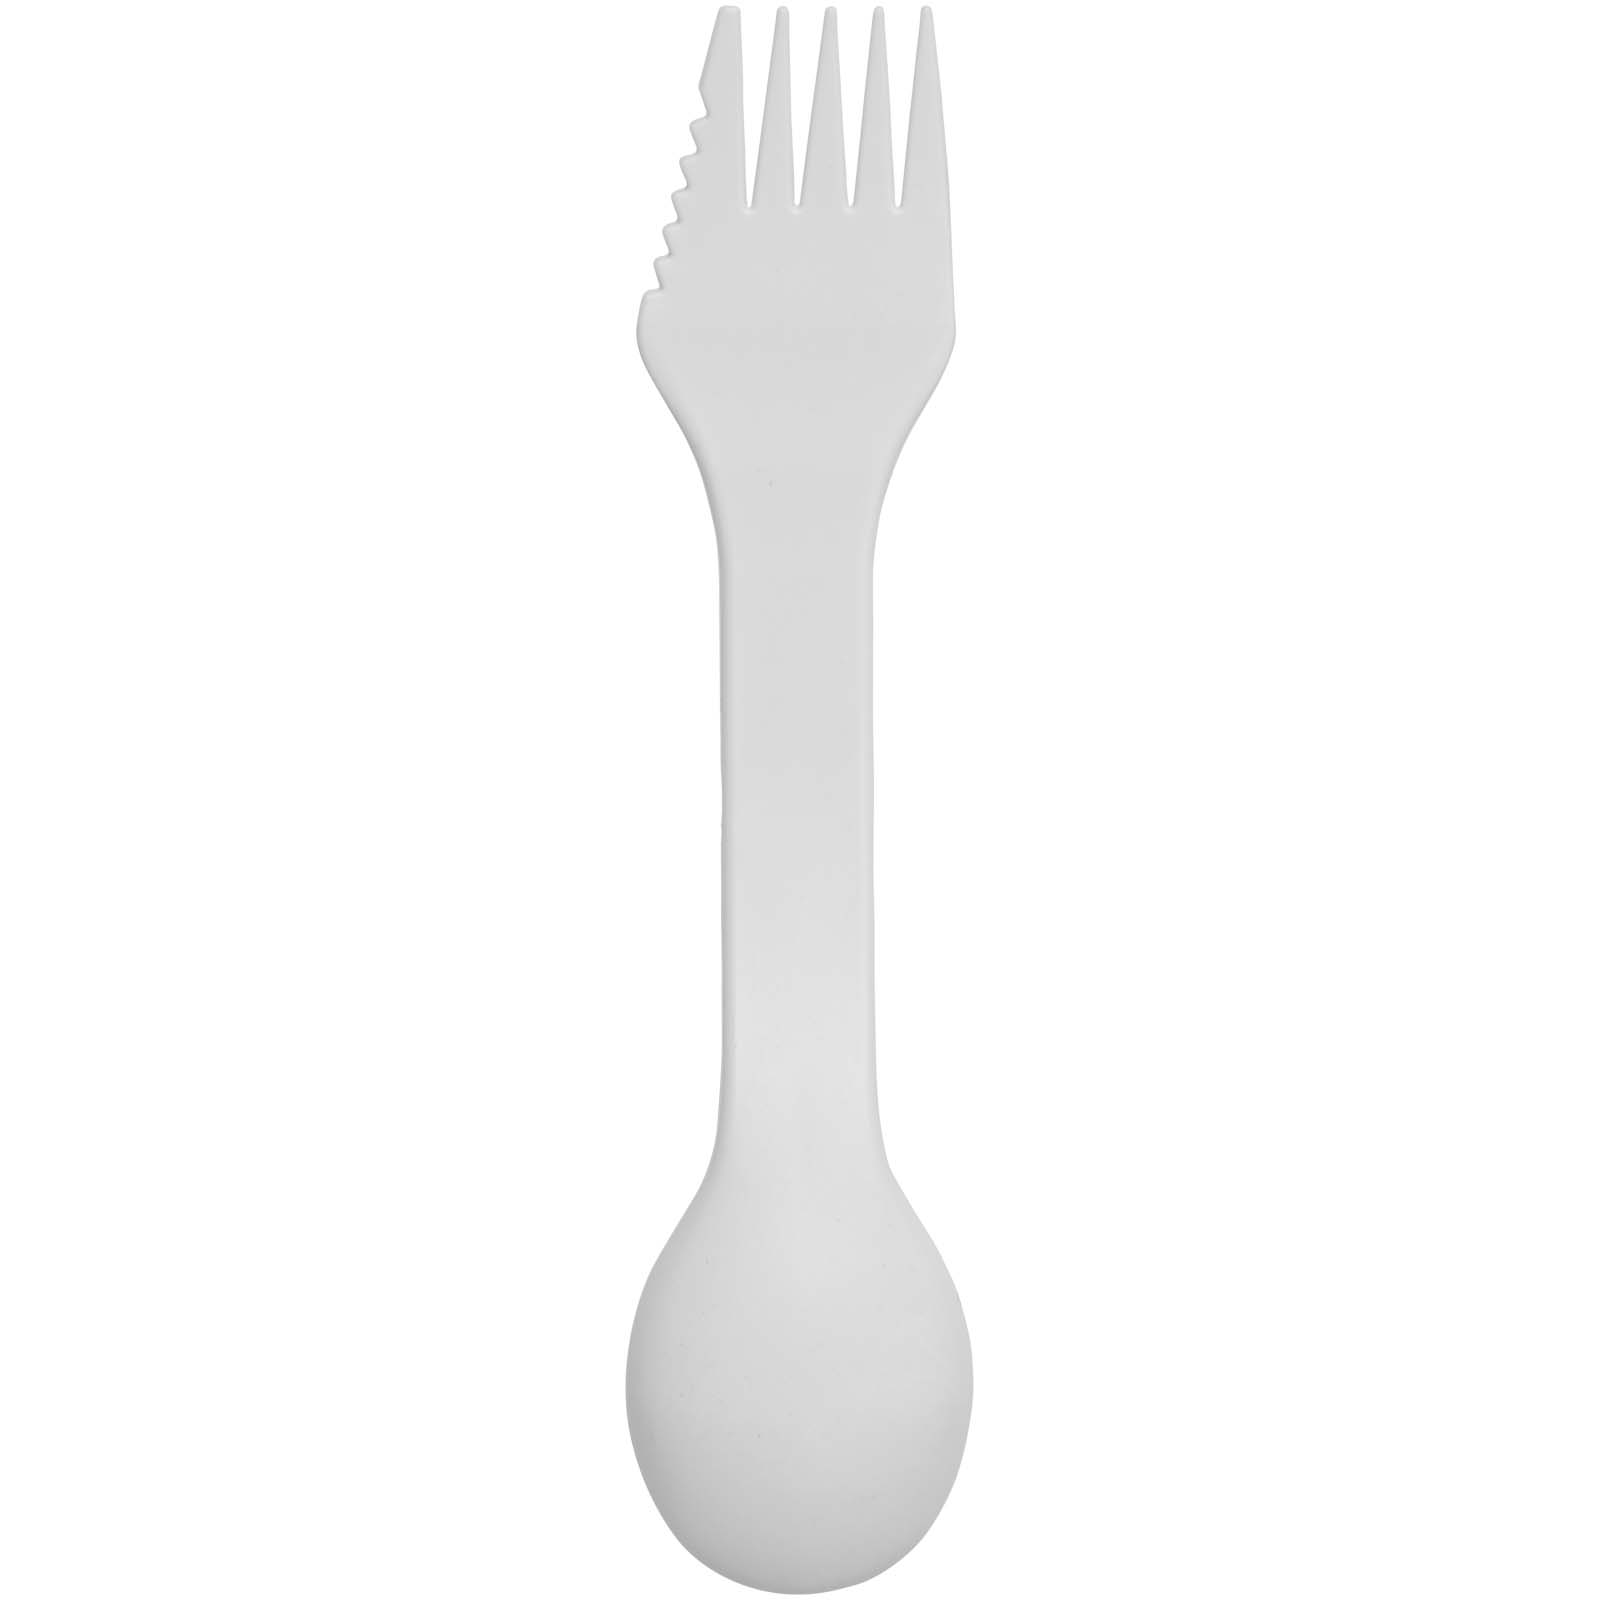 Advertising Home Accessories - Epsy Rise spork - 2